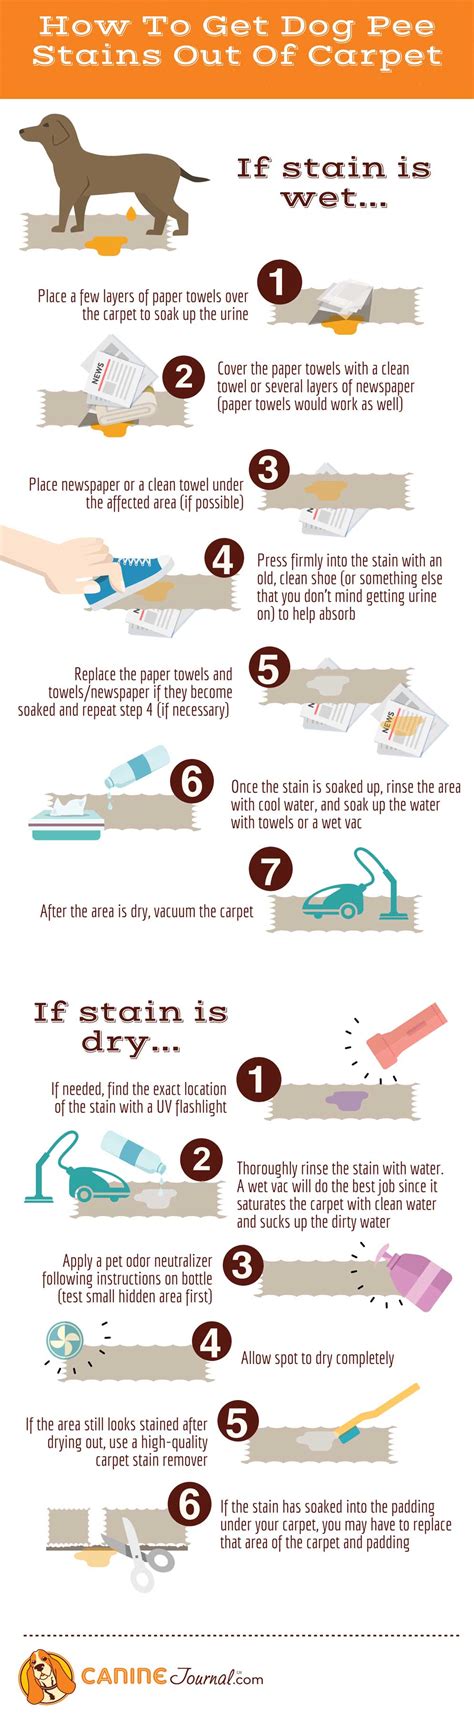 How to get dog pee out of carpet. Aug 21, 2020 ... Vinegar and Baking Soda · Cover the stained area with vinegar. · Sprinkle the baking soda on the top. · Cover it using a dish or towel for 1-2... 